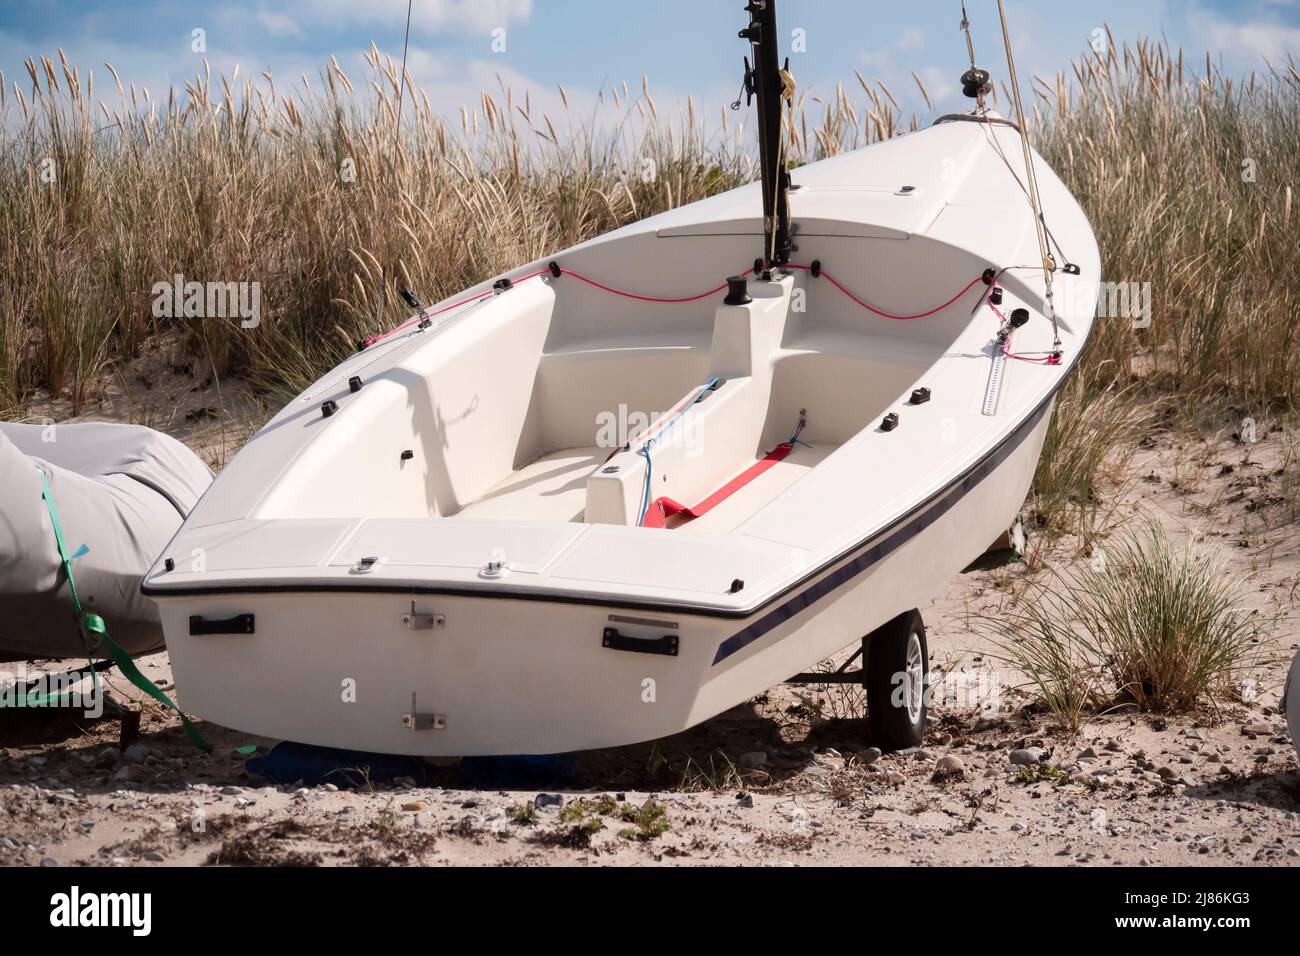 A small sailboat on the trailer on the sandy beach with dune grass Stock Photo